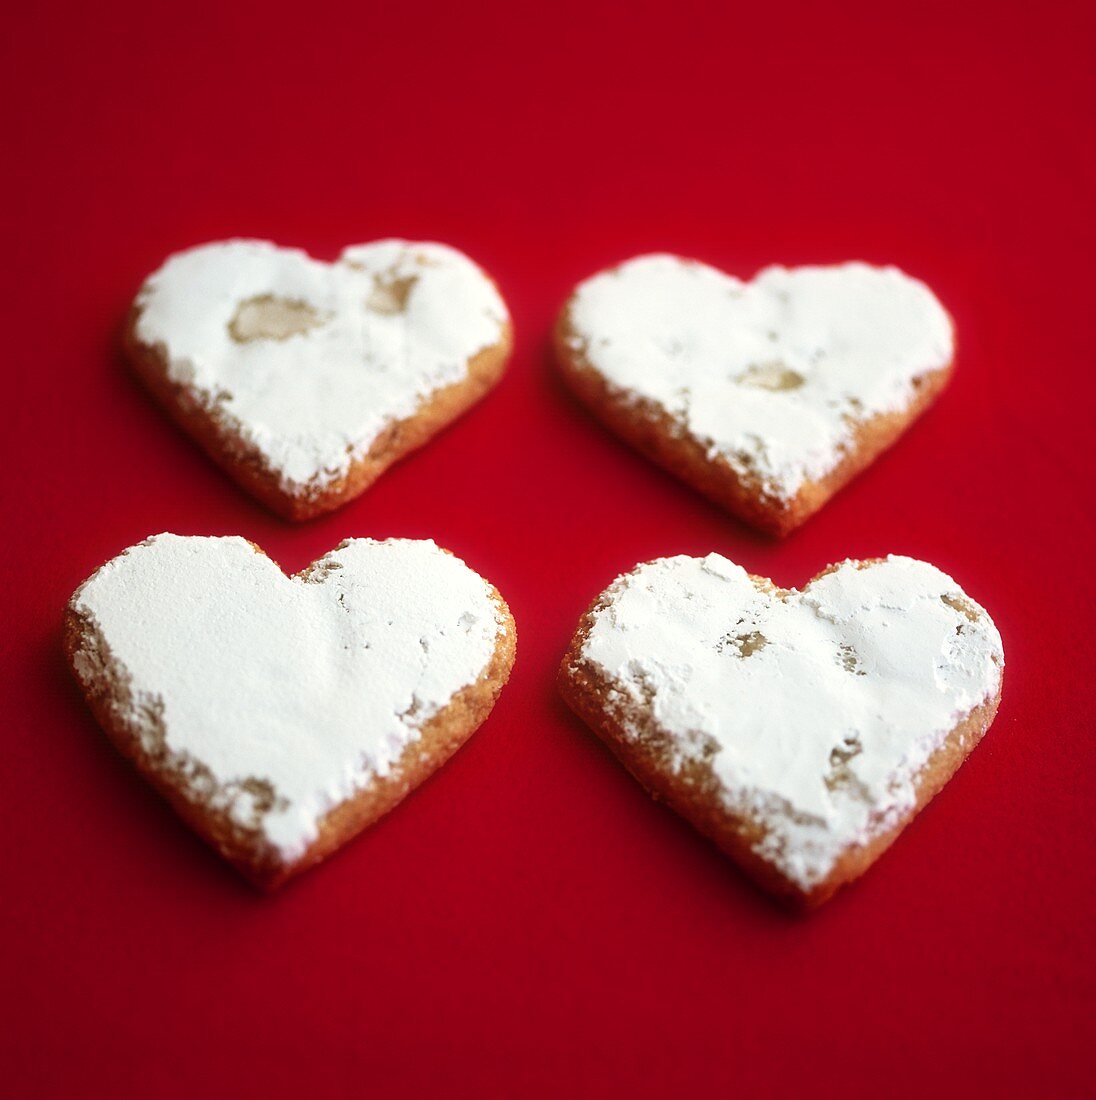 Four heart-shaped almond biscuits with icing sugar